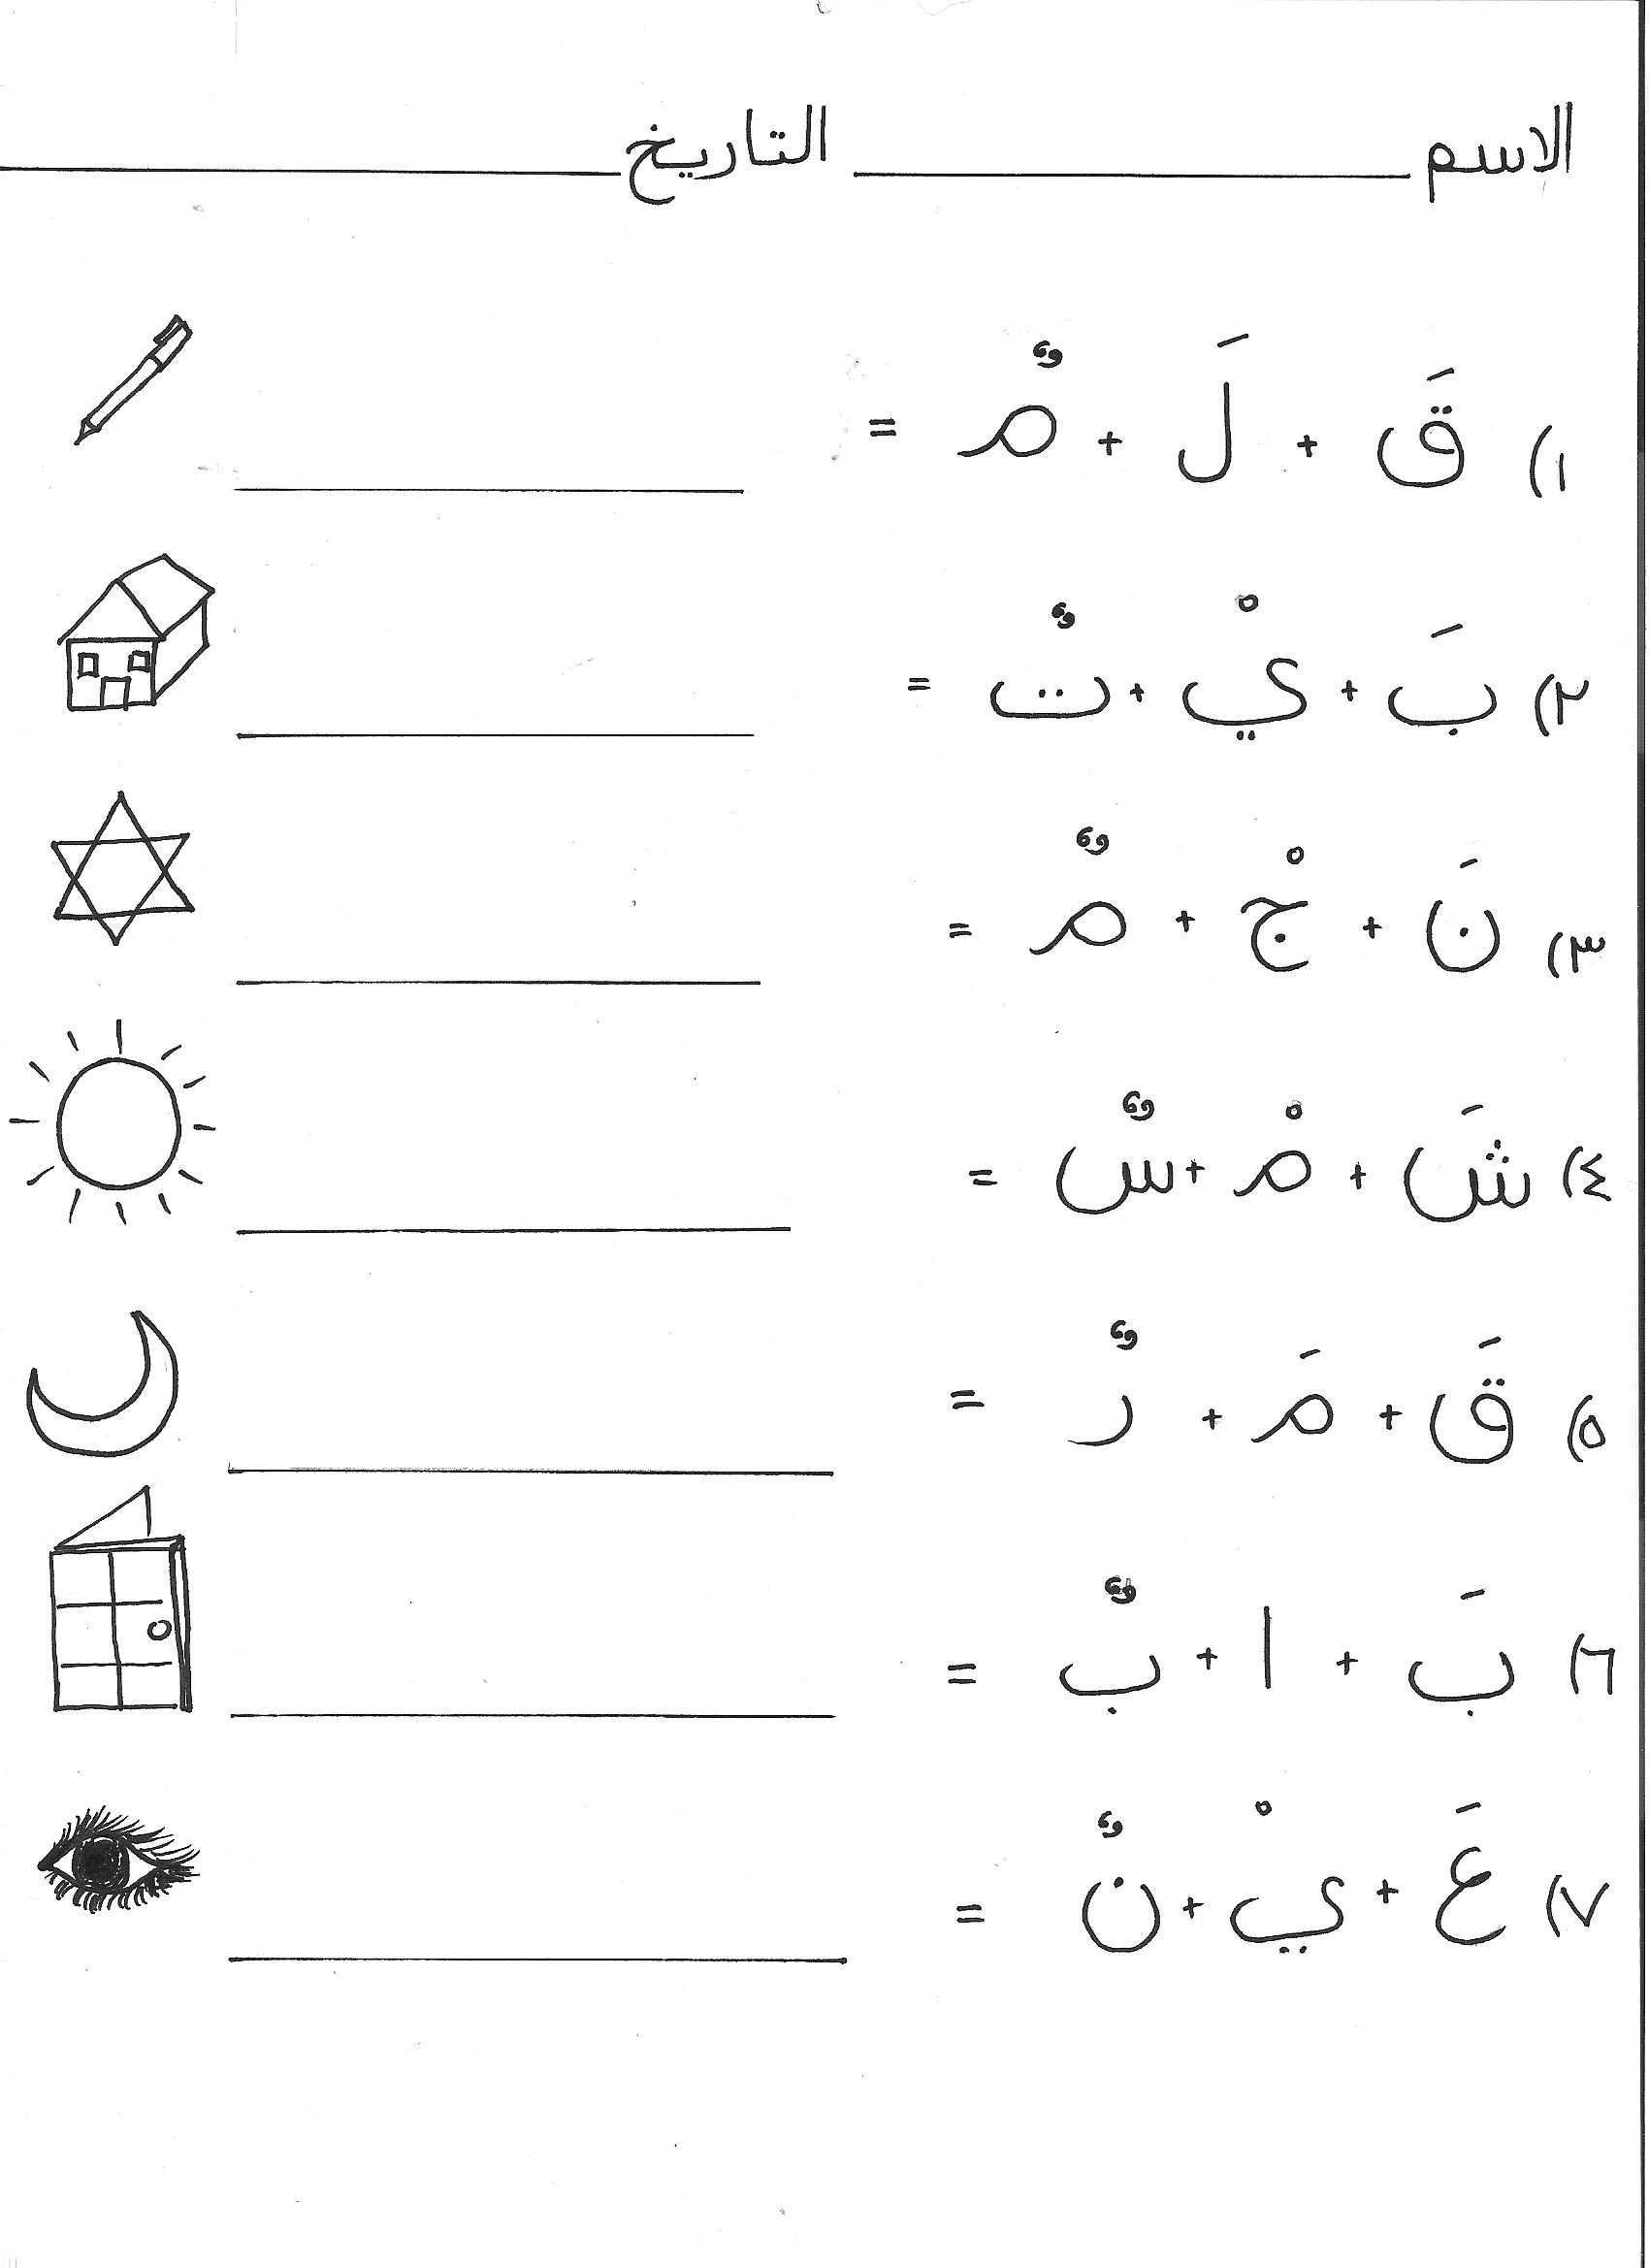 Joining Letters To Make Words - Funarabicworksheets | Arabic